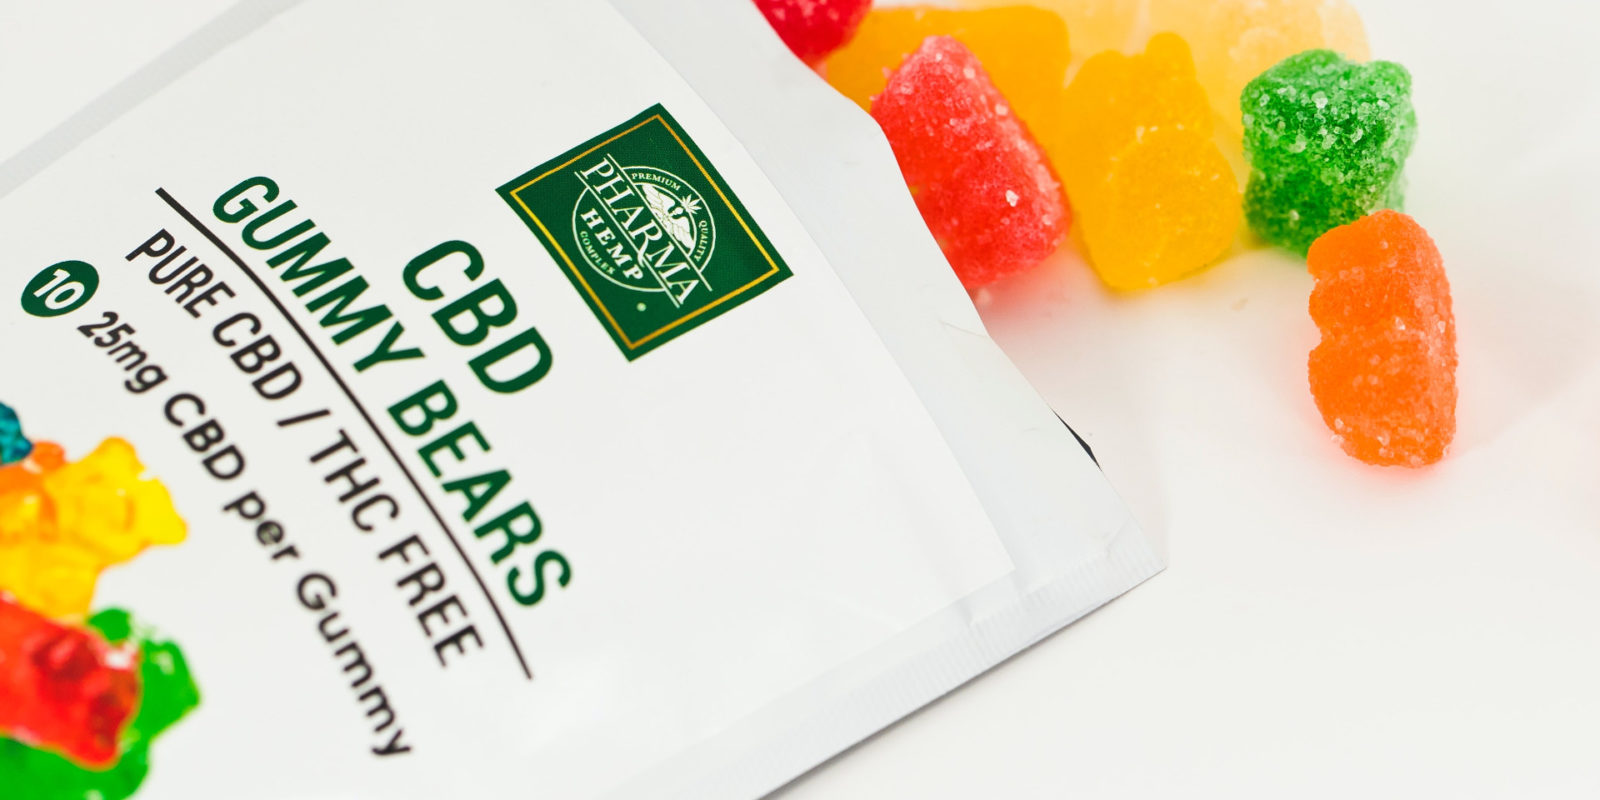 cannabis edibles are products that contain cannabis and can be consumed like food